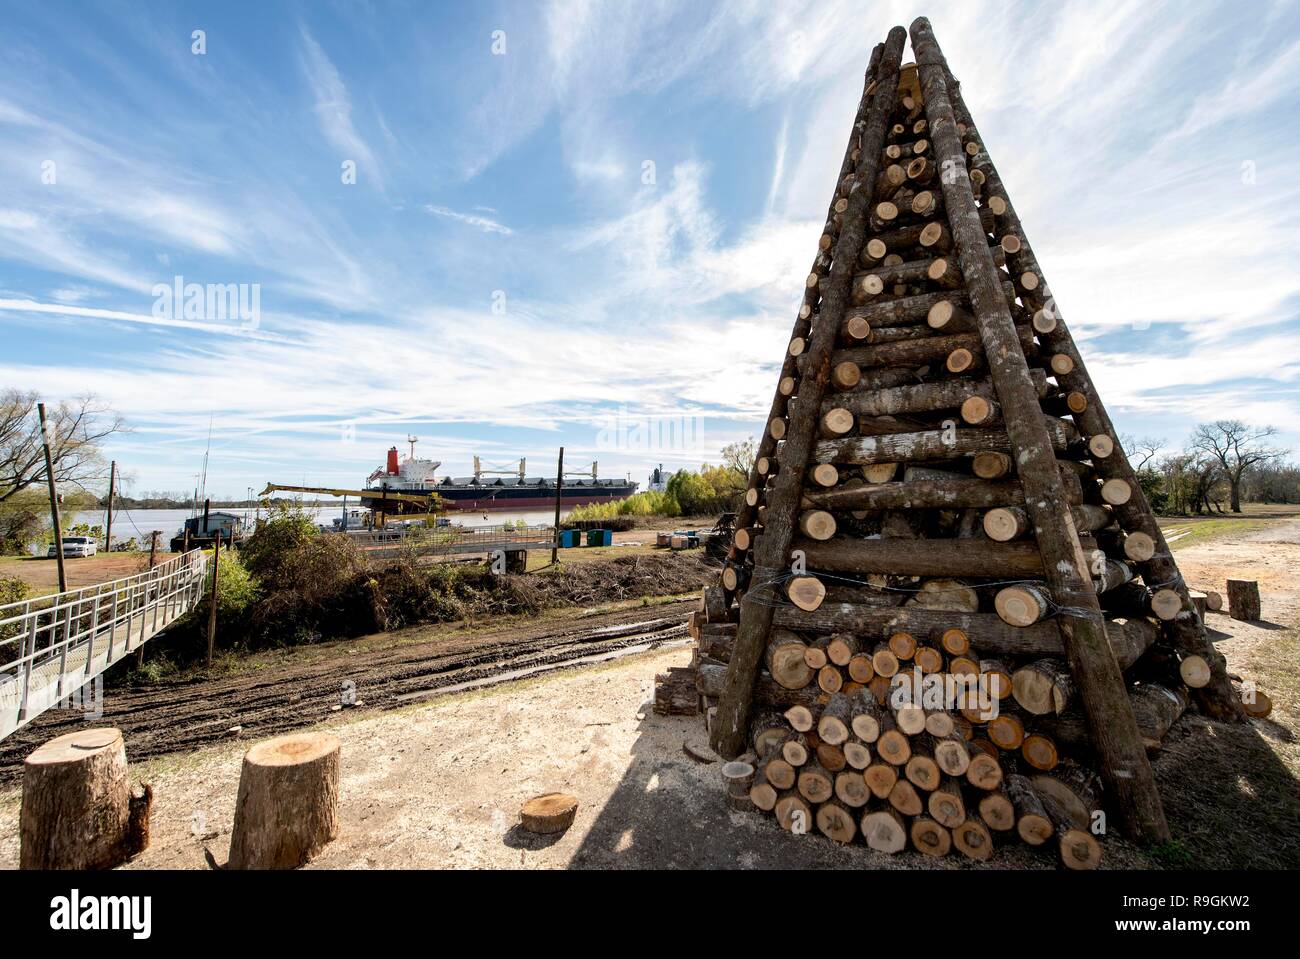 St. James Parish, Louisiana, USA. 21st Dec, 2018. On the earthen levees along the Mississippi River's Great River Road between New Orleans and Baton Rouge, 15-foot-high log structures are constructed each December by the residents of Gramercy, Lutcher and Paulina. These bonfire structures are ceremoniously set ablaze on Christmas Eve to help guide the route of ''Papa Noel, '' as Santa Claus is known among the Cajun population. Credit: Brian Cahn/ZUMA Wire/Alamy Live News Stock Photo